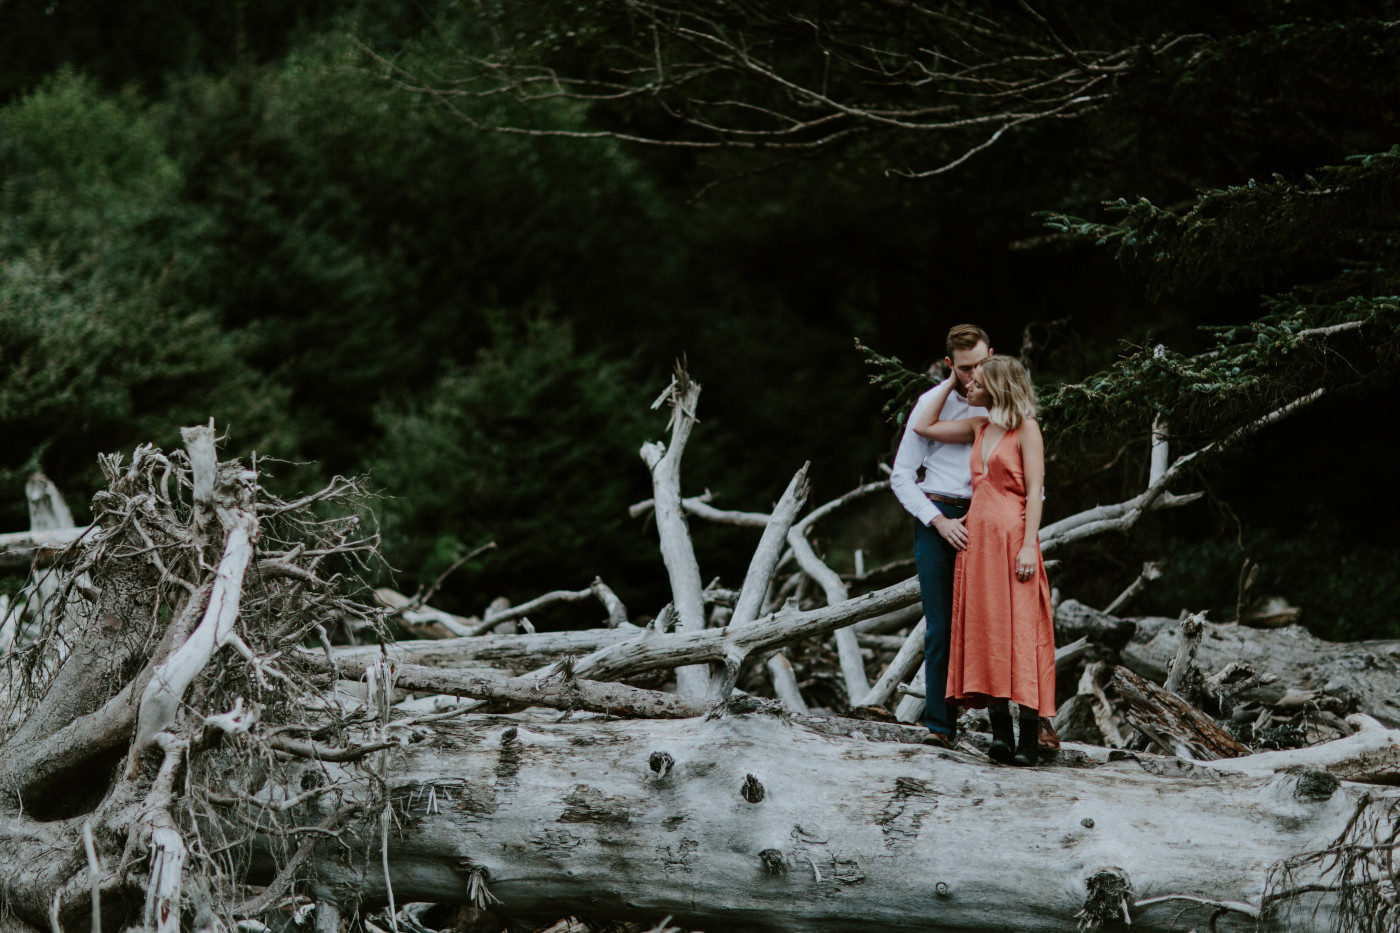 Billy kisses Chelsey. Elopement wedding photography at Cannon Beach by Sienna Plus Josh.